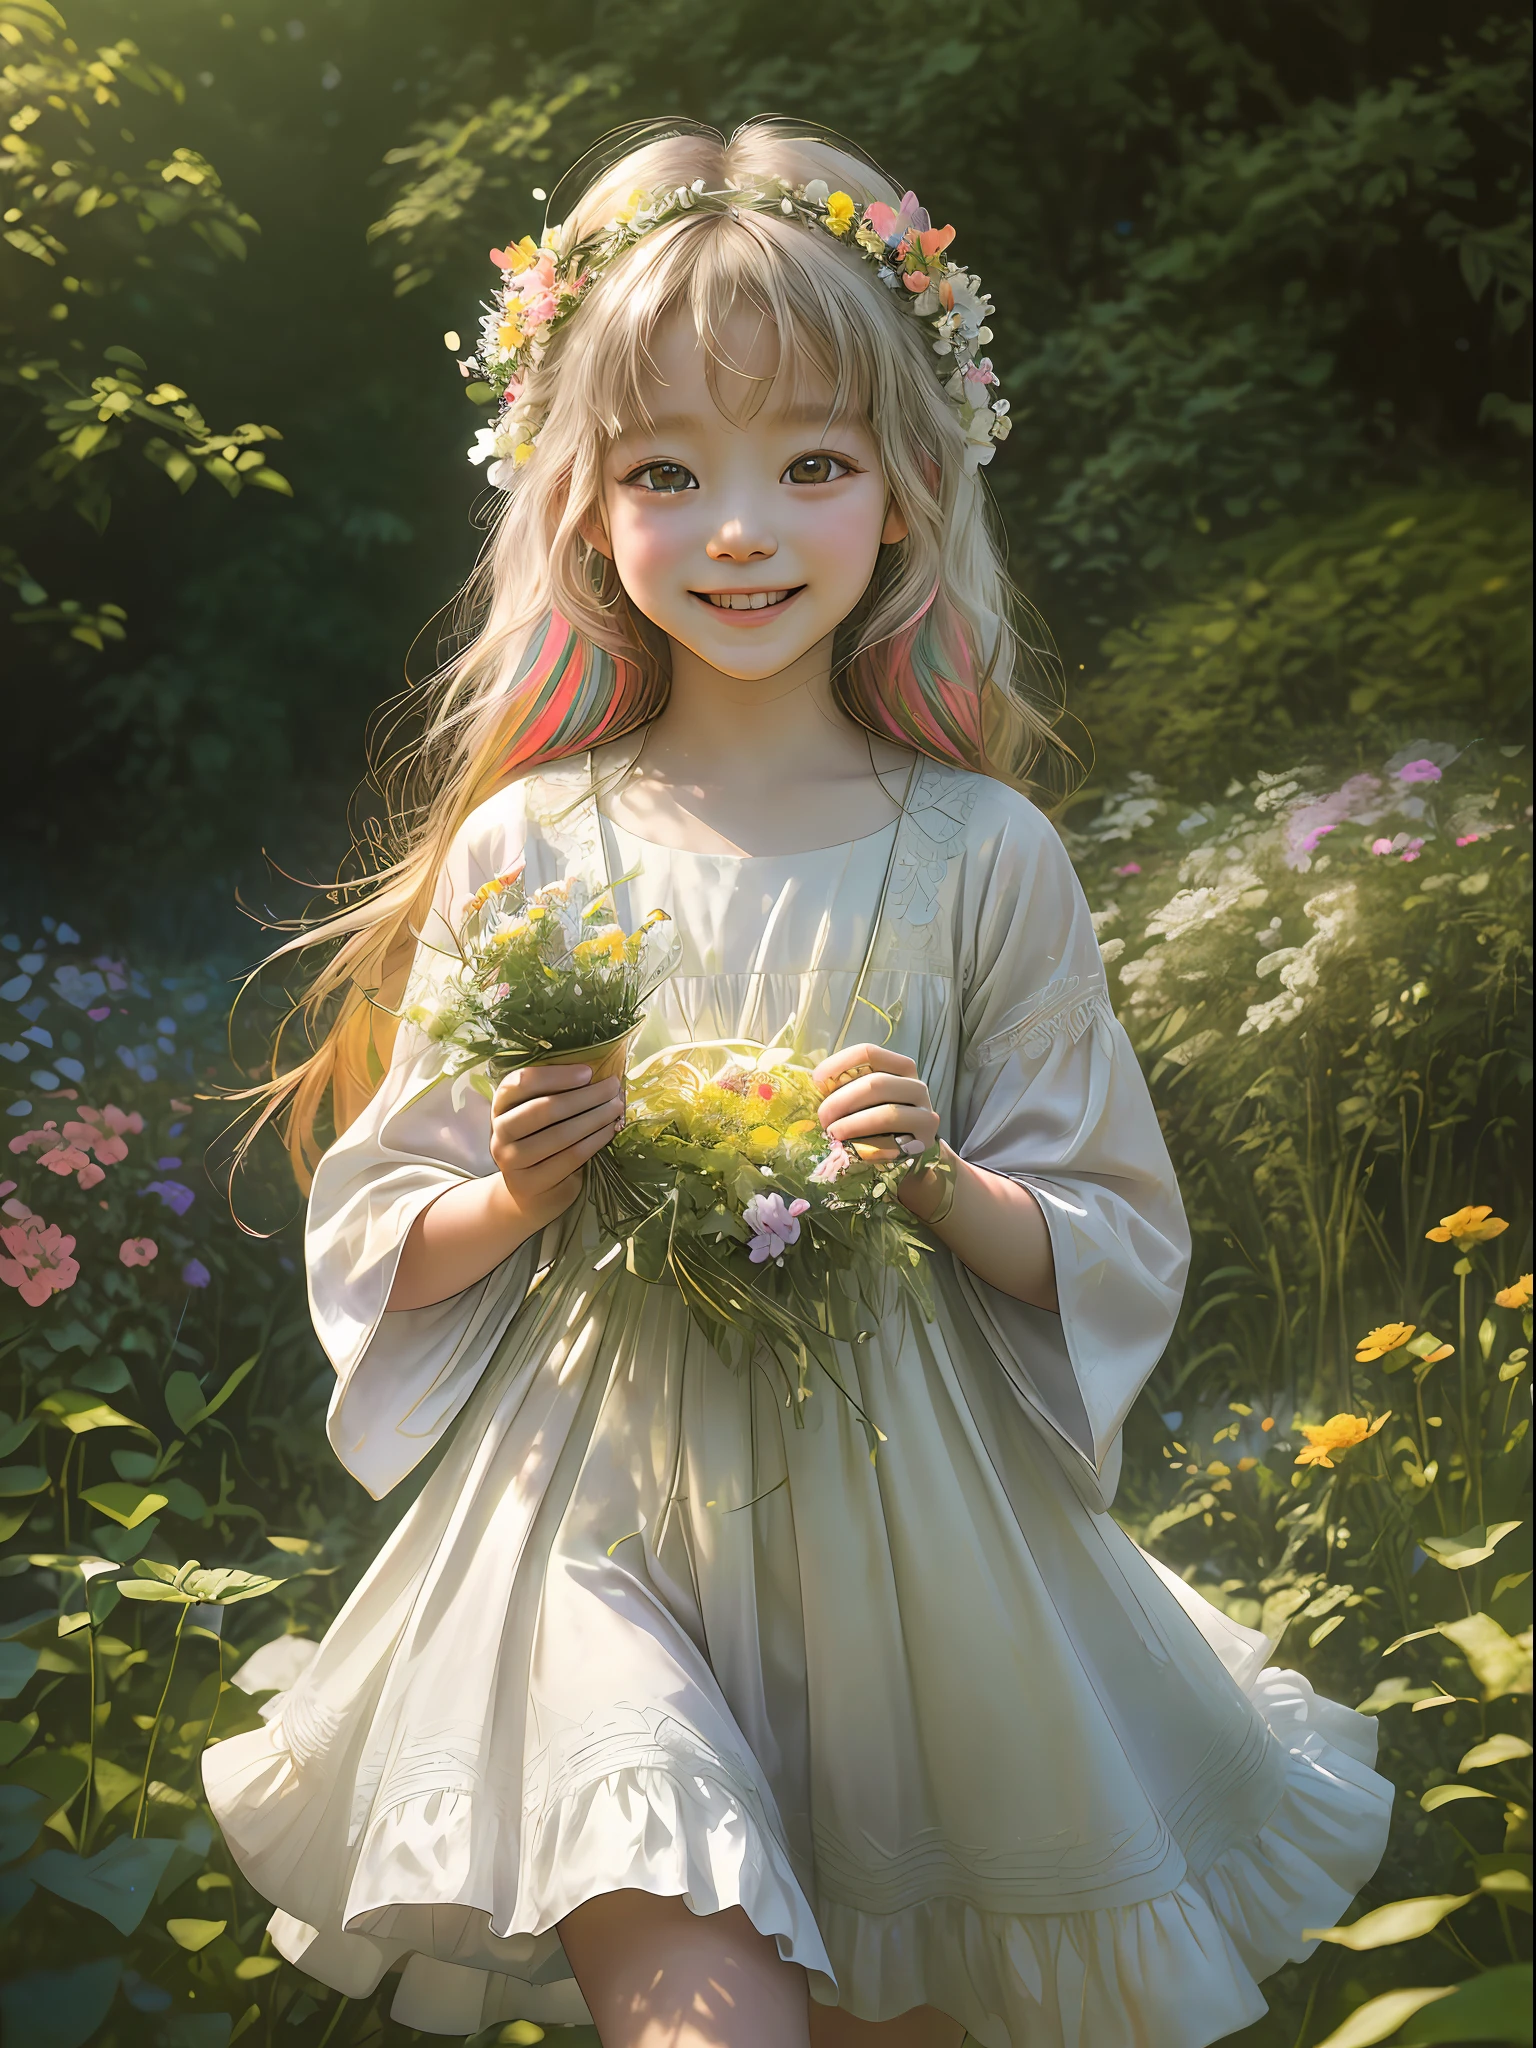 Camera: Professional DSLR Camera, Lens: Macro Lens with Focal Length around 100mm (masterpiece, high resolution, photo-realistic:1.4), (adorable Japanese child:1.2), (white flowing dress:1.2), (playfully running in the garden:1.2), (abundant lush plants and colorful flowers:1.2), (butterflies fluttering around:1.2), (sunlit garden:1.1), (soft natural lighting:1.2), (capturing the child's happiness:1.2), (curious smile:1.2), (innocent expression:1.2), (harmonious garden setting:1.1), (serene atmosphere:1.1), (3:4 aspect ratio:1.1), (vivid colors:1.2), (captivating details:1.1), (immersive depth of field:1.2), (authentic cultural representation:1.2), (respectful cultural context:1.1), (celebrating nature's beauty:1.1), (cherished moments:1.1).